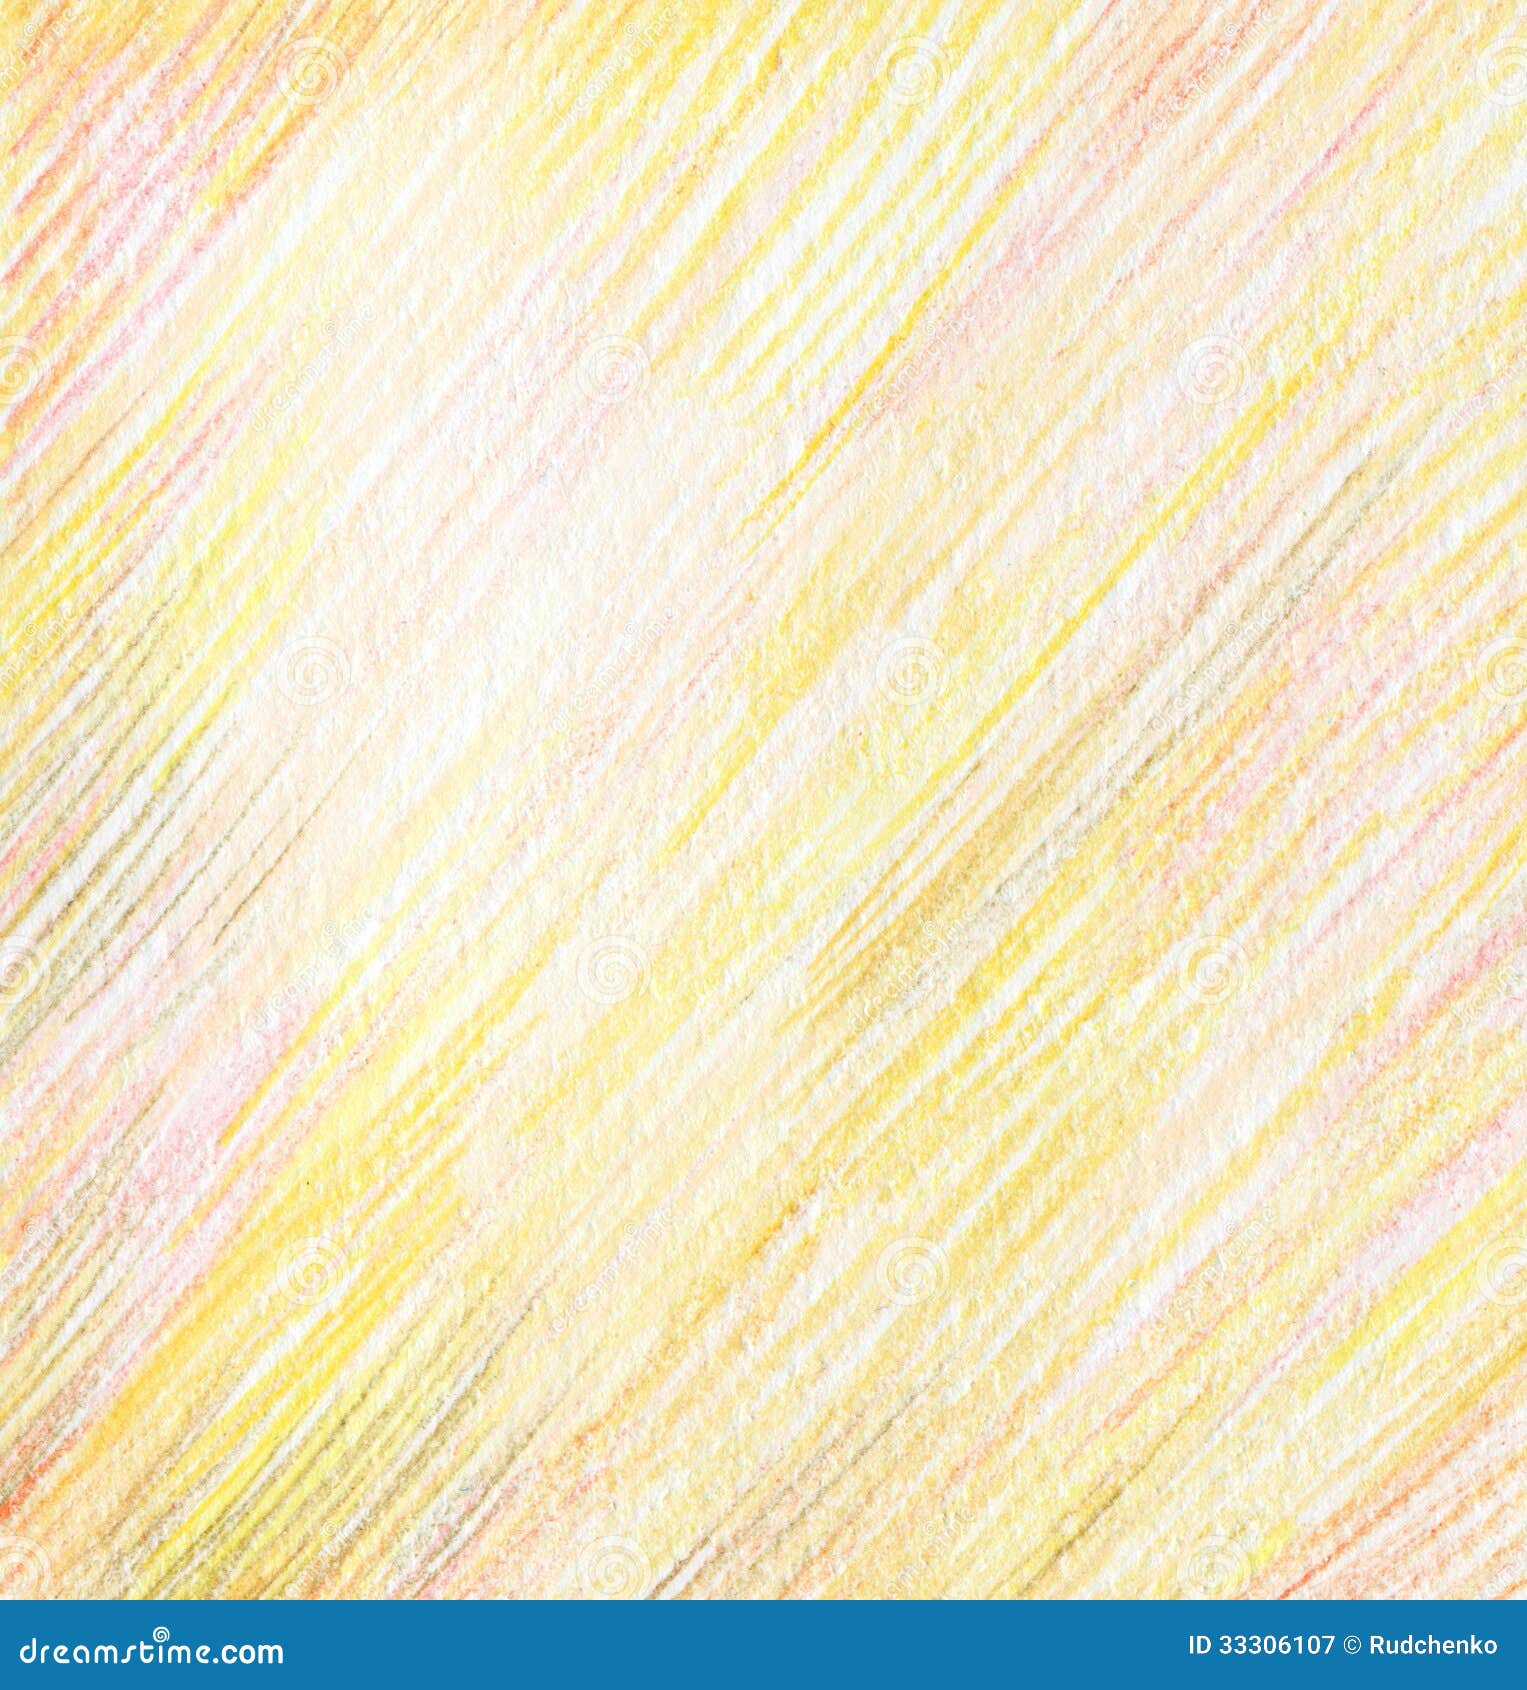 Abstract Color Pencil Background Stock Image - Image 33306107